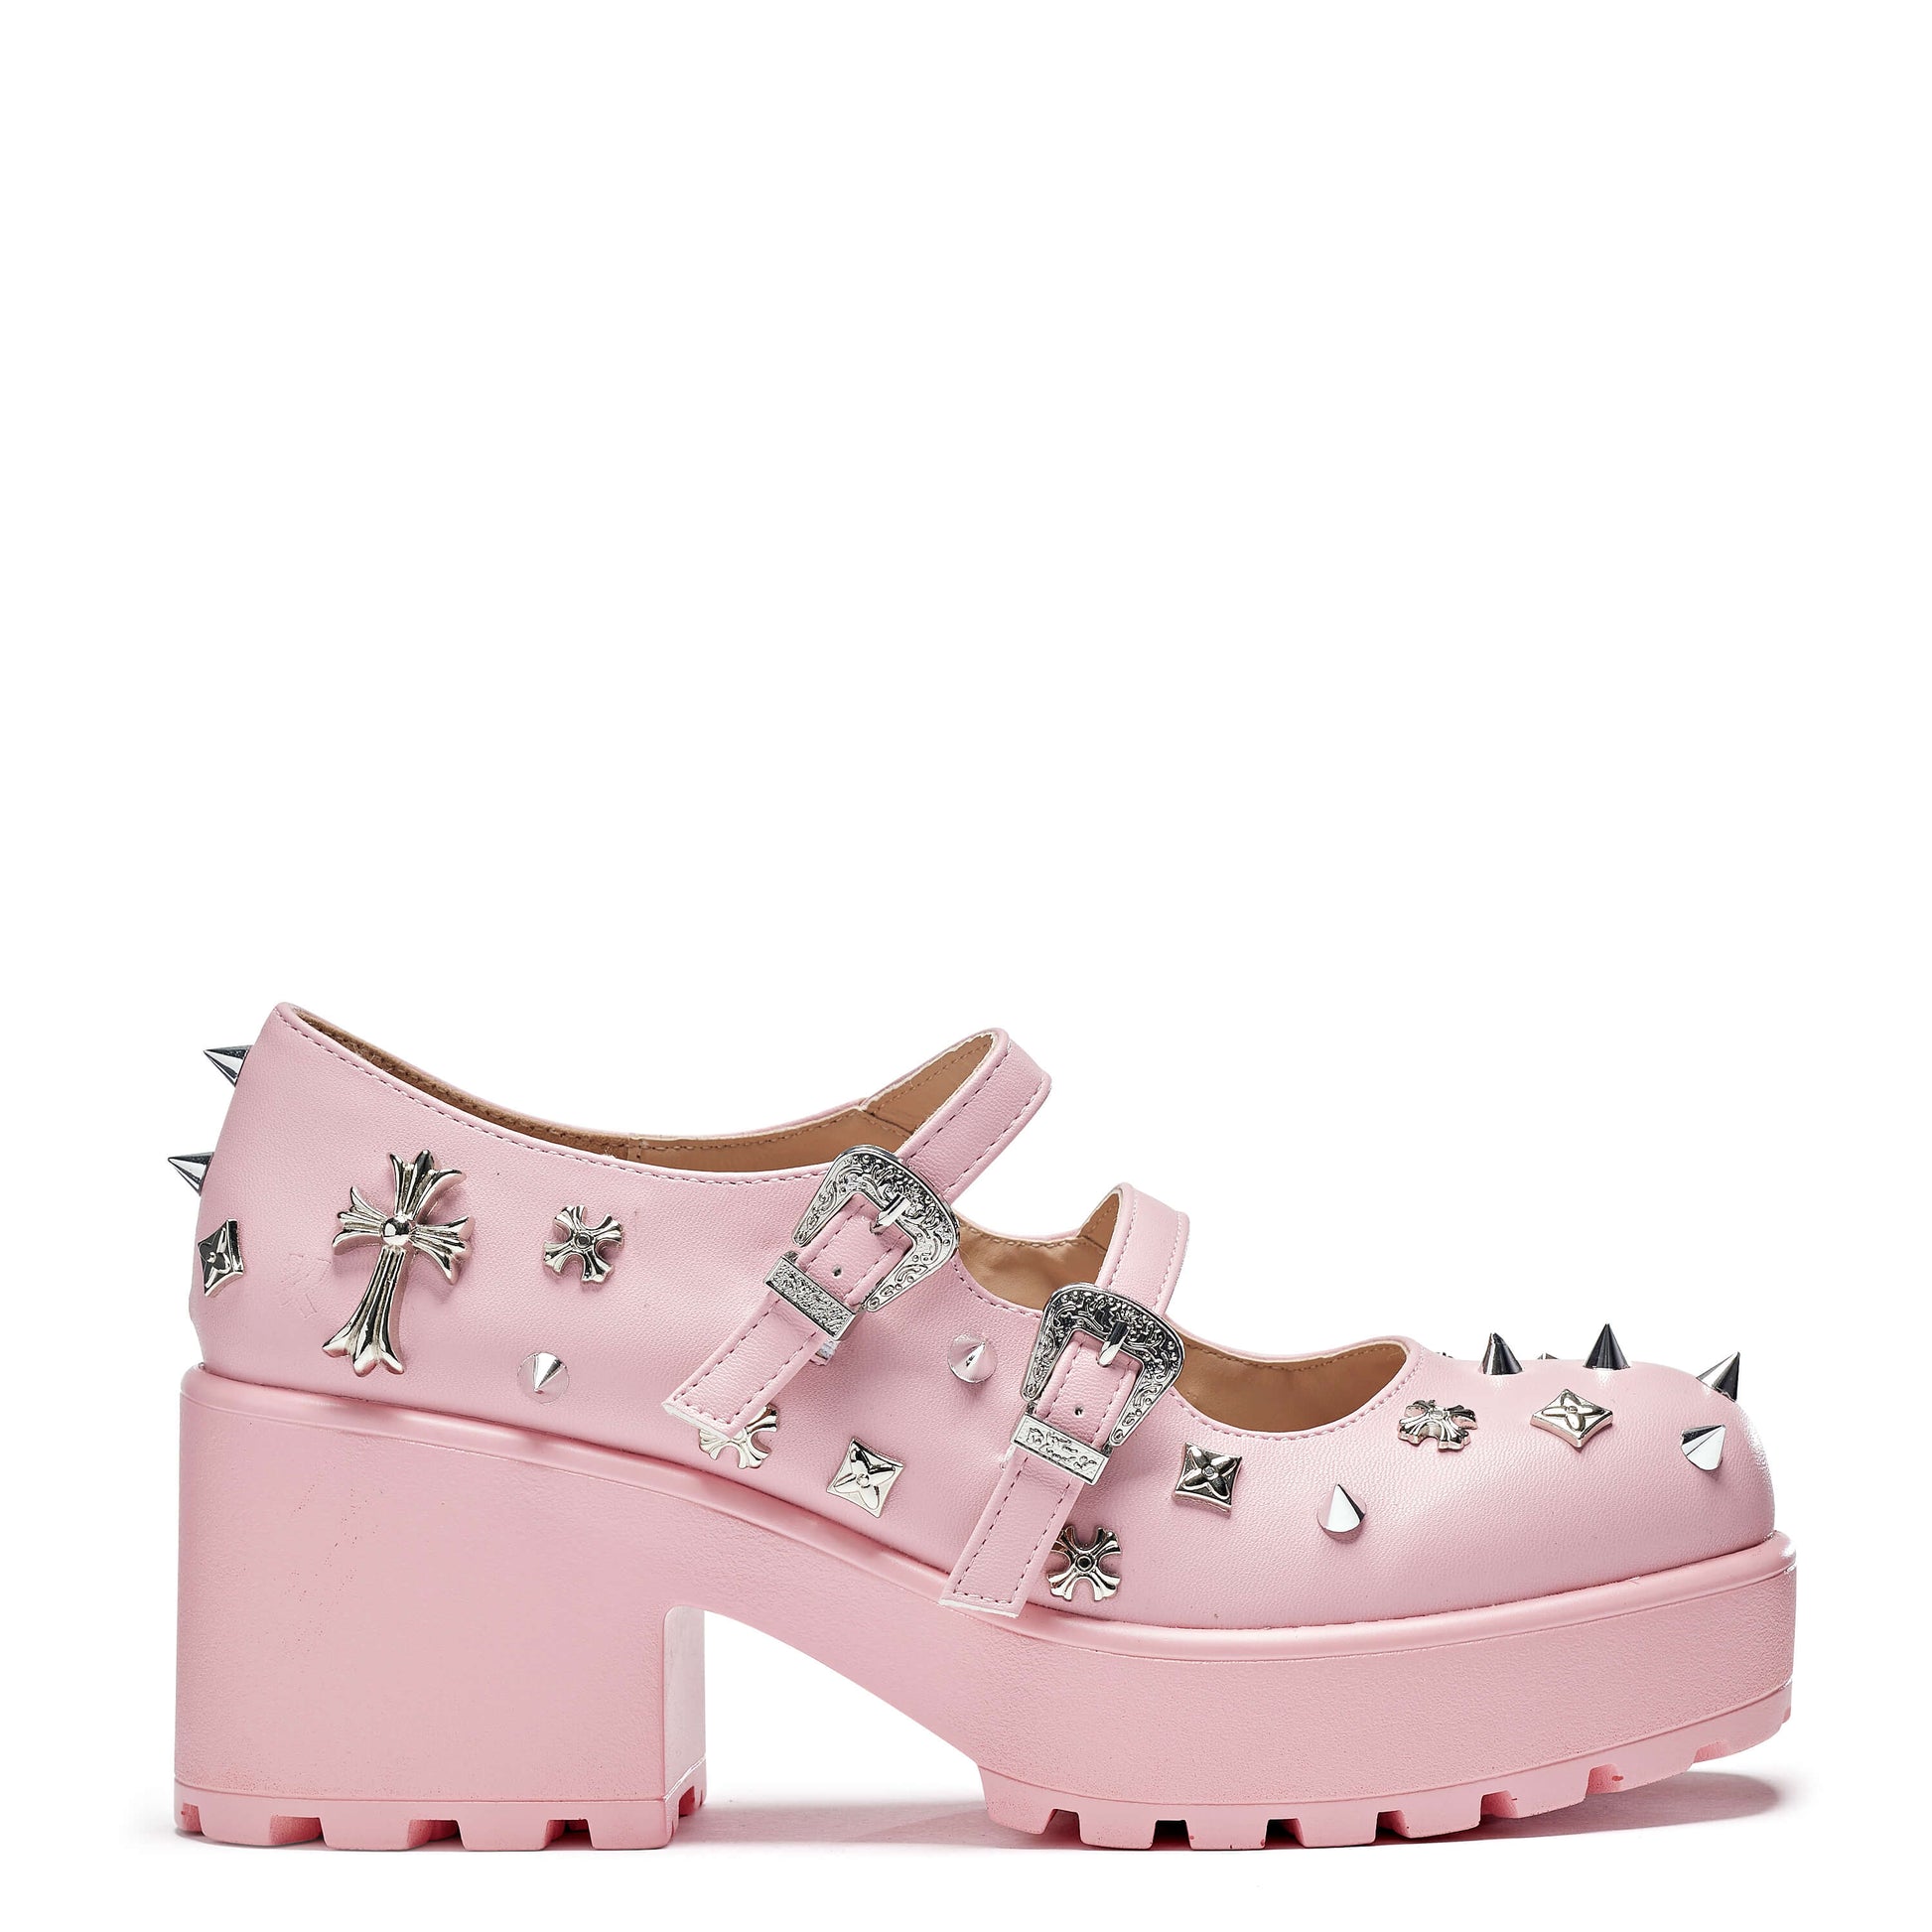 Devil Blushes Double Strap Mary Jane Shoes - Mary Janes - KOI Footwear - Pink - Side View